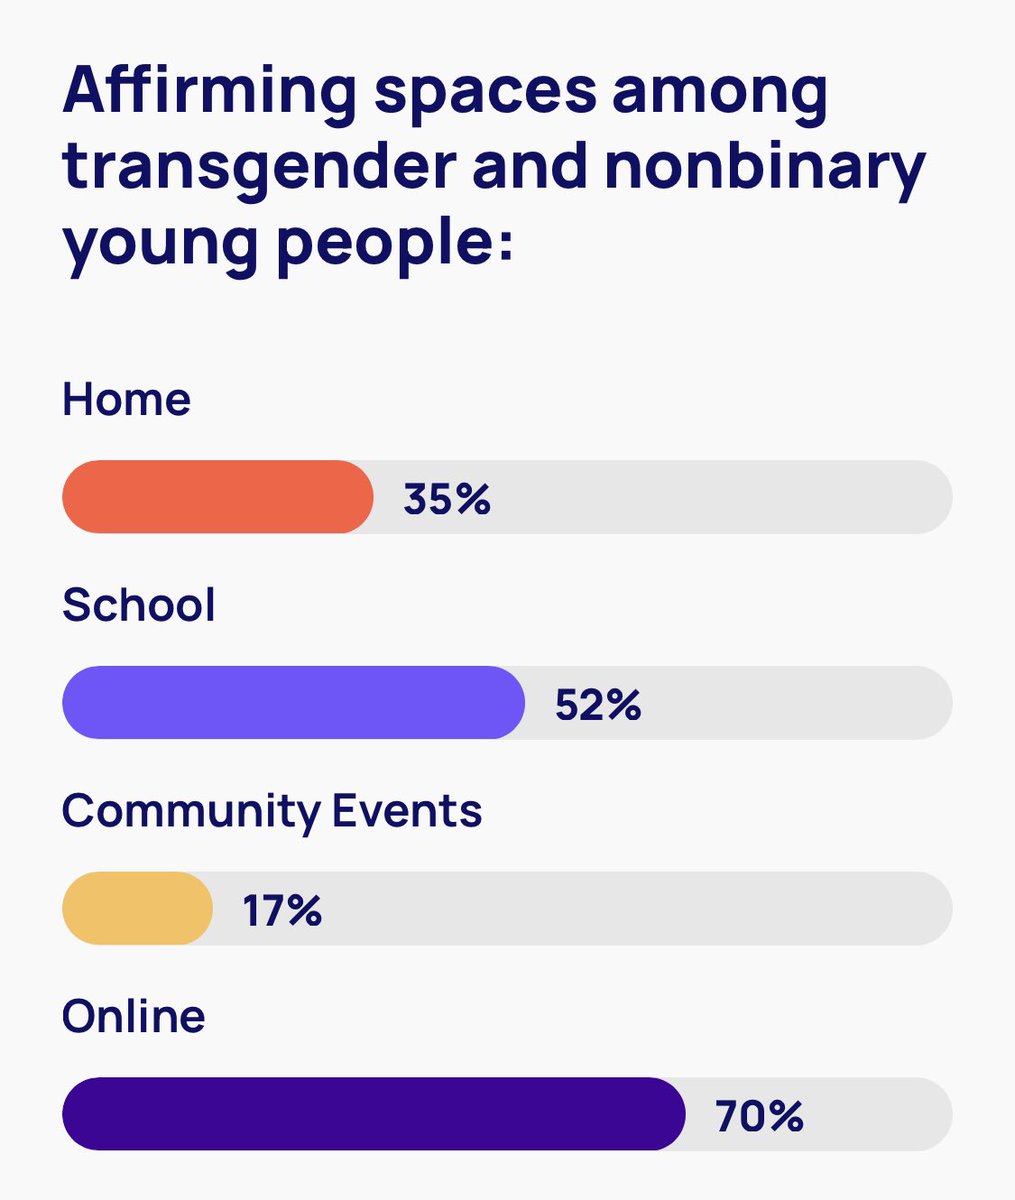 HALF of trans and non-binary youth have considered suicide in the past year. 20% have attempted suicide. Yet 50% doesn’t find it safe to disclose their struggles and 70% find support online. TP’s visuals are incredible in disseminating this important & heartbreaking data